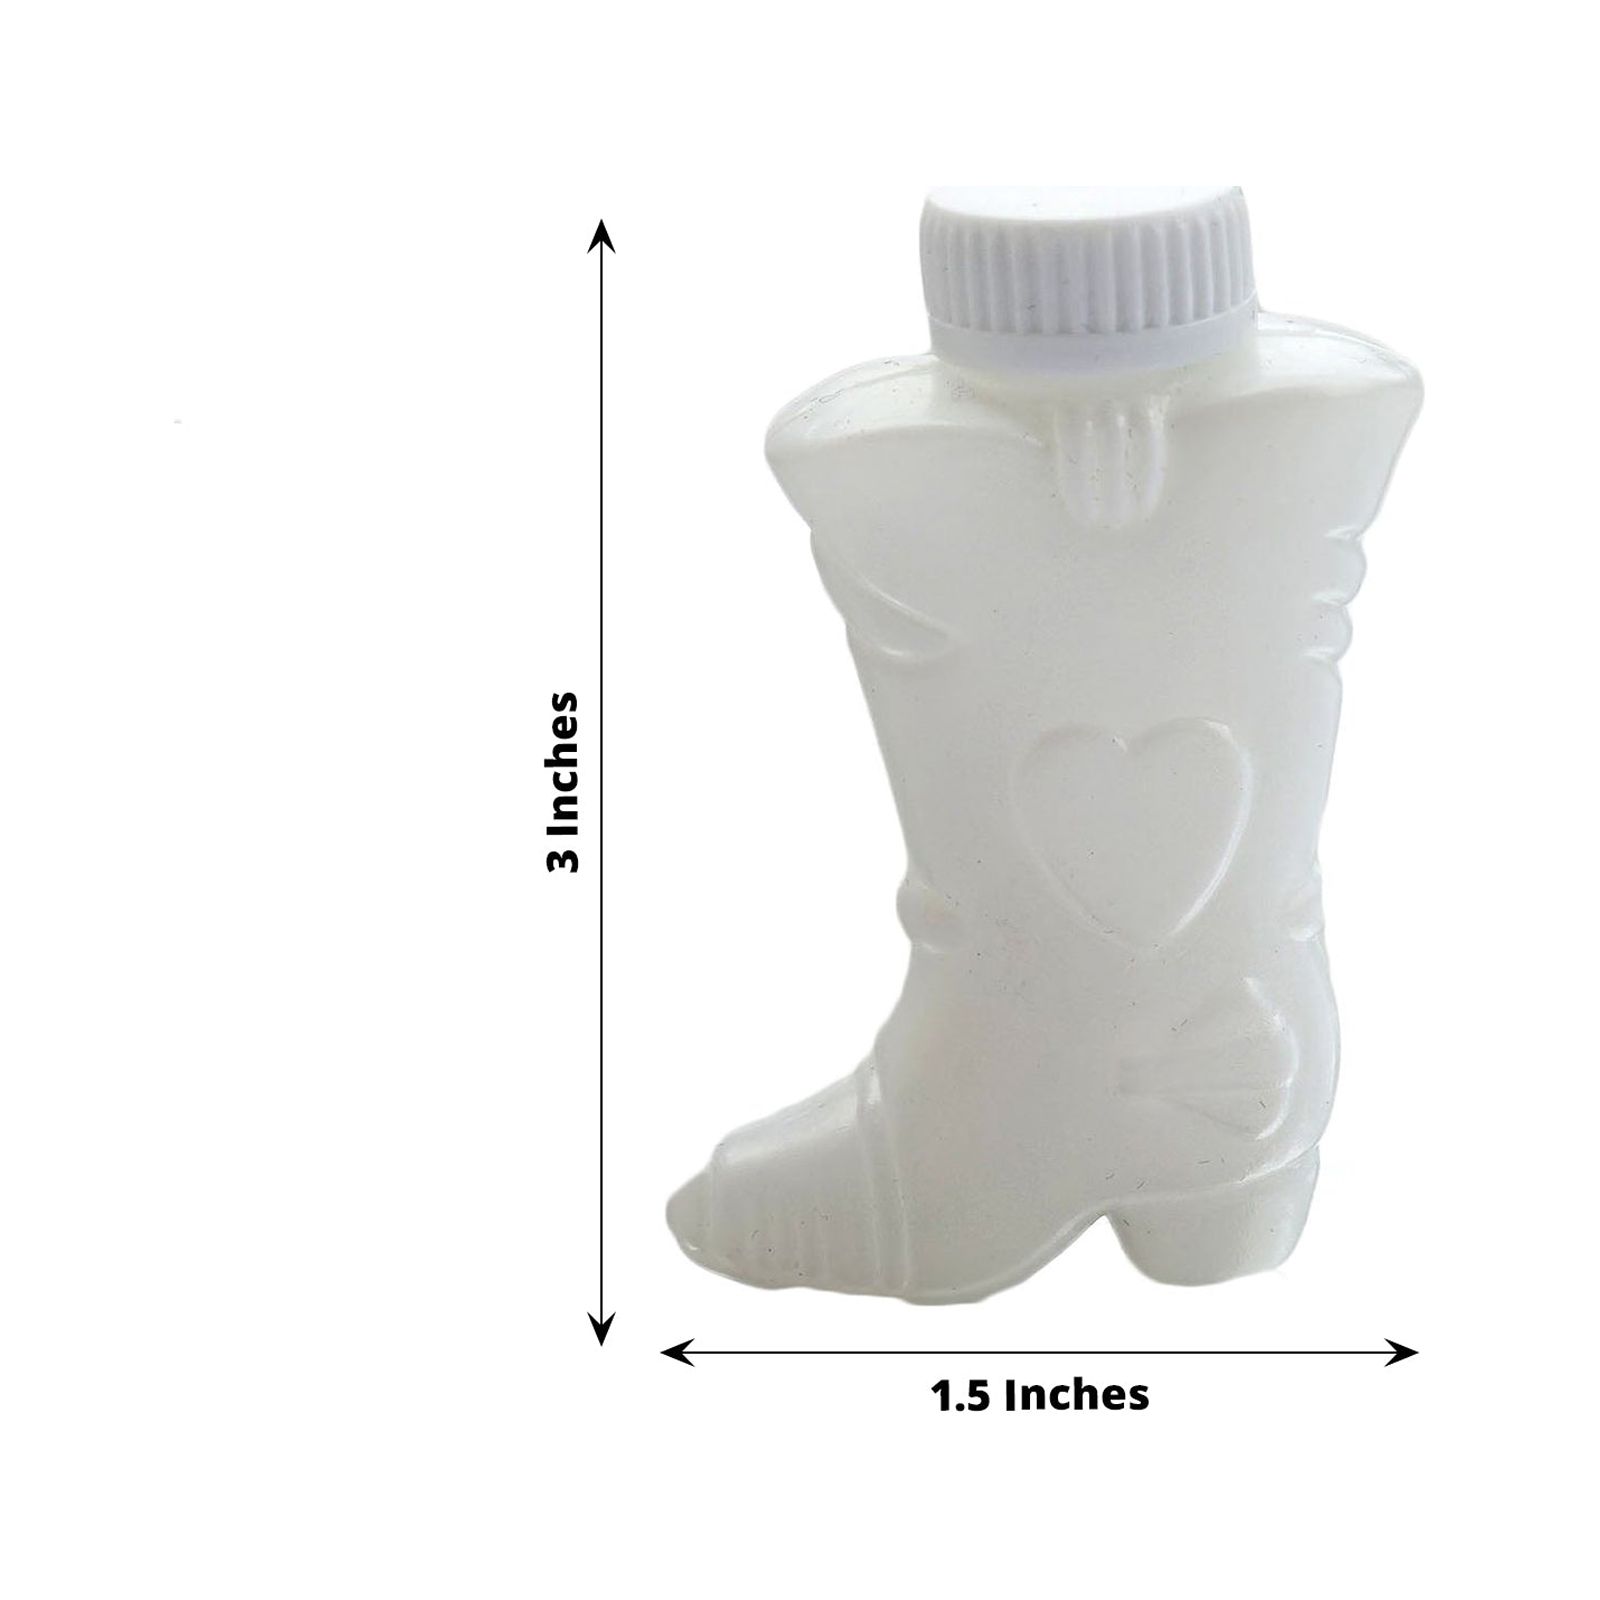 Efavormart Wholesale 24 pack White Cowboy Boot Bubbles Wedding Bridal Favor  for Wedding, Anniversary, Engagement, Bridal, Celebration, Valentine’s Day, Family Reunion, and Gift for Couple Boy Girl - image 3 of 11